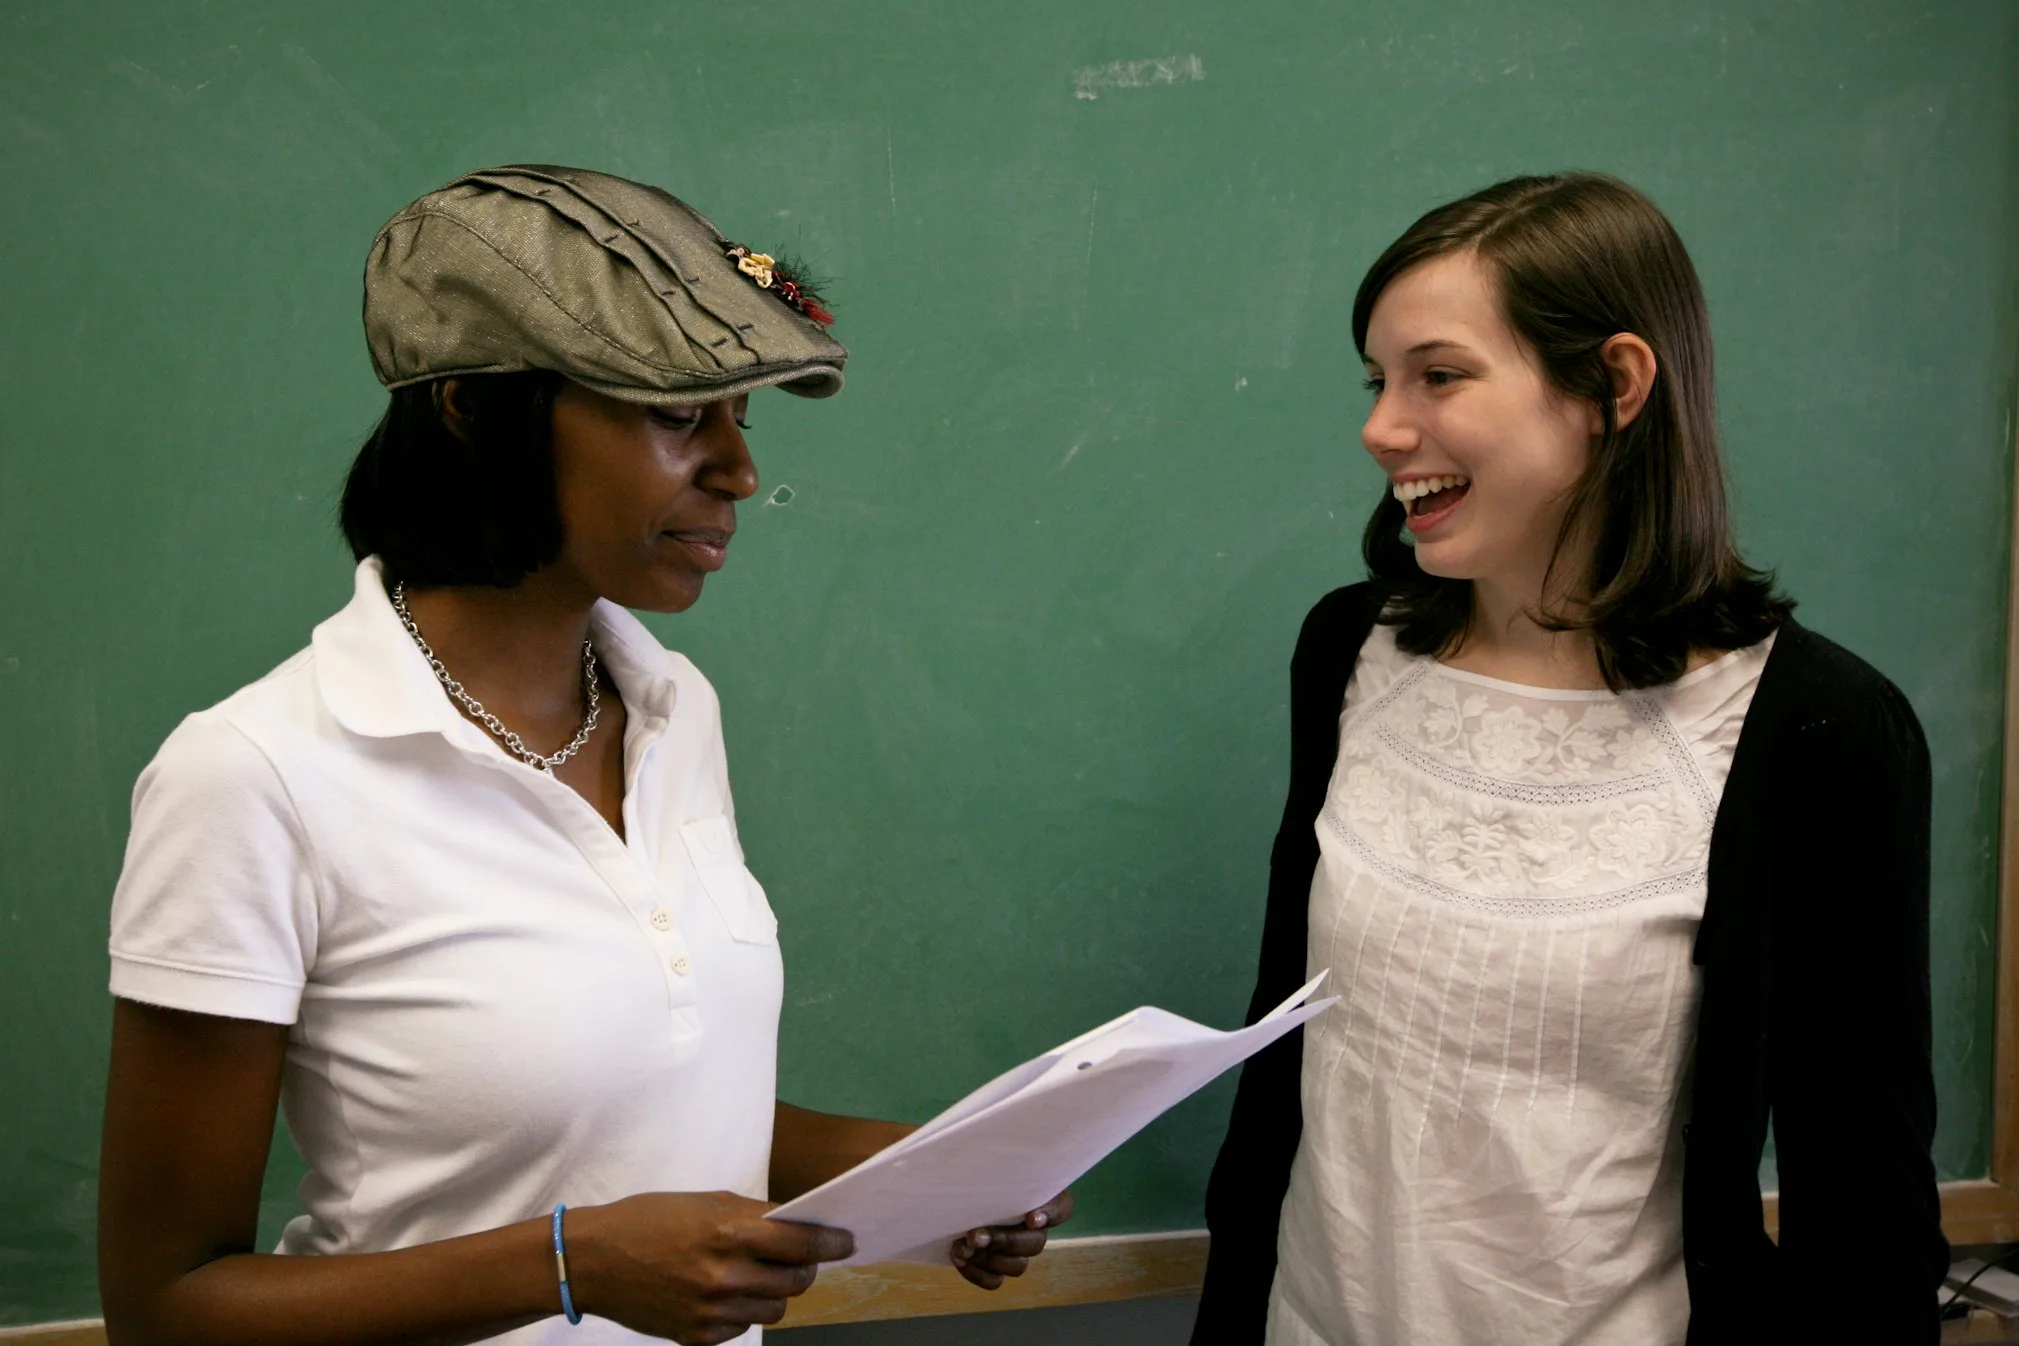 A teacher and a student discussing a paper assignment in front of a green chalk board.